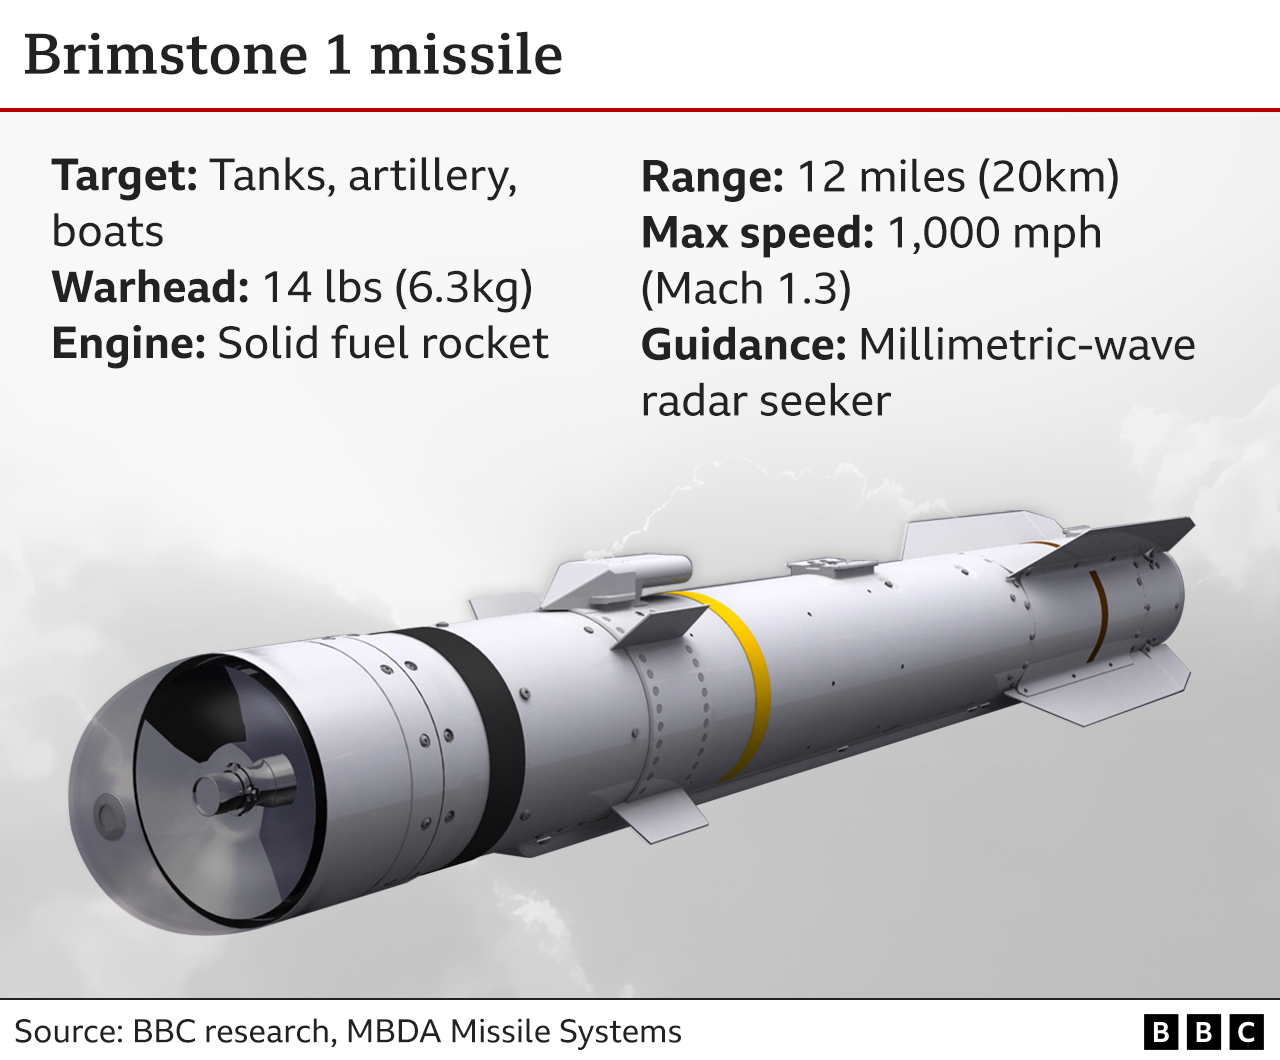 Graphic showing Brimstone 1 missile.